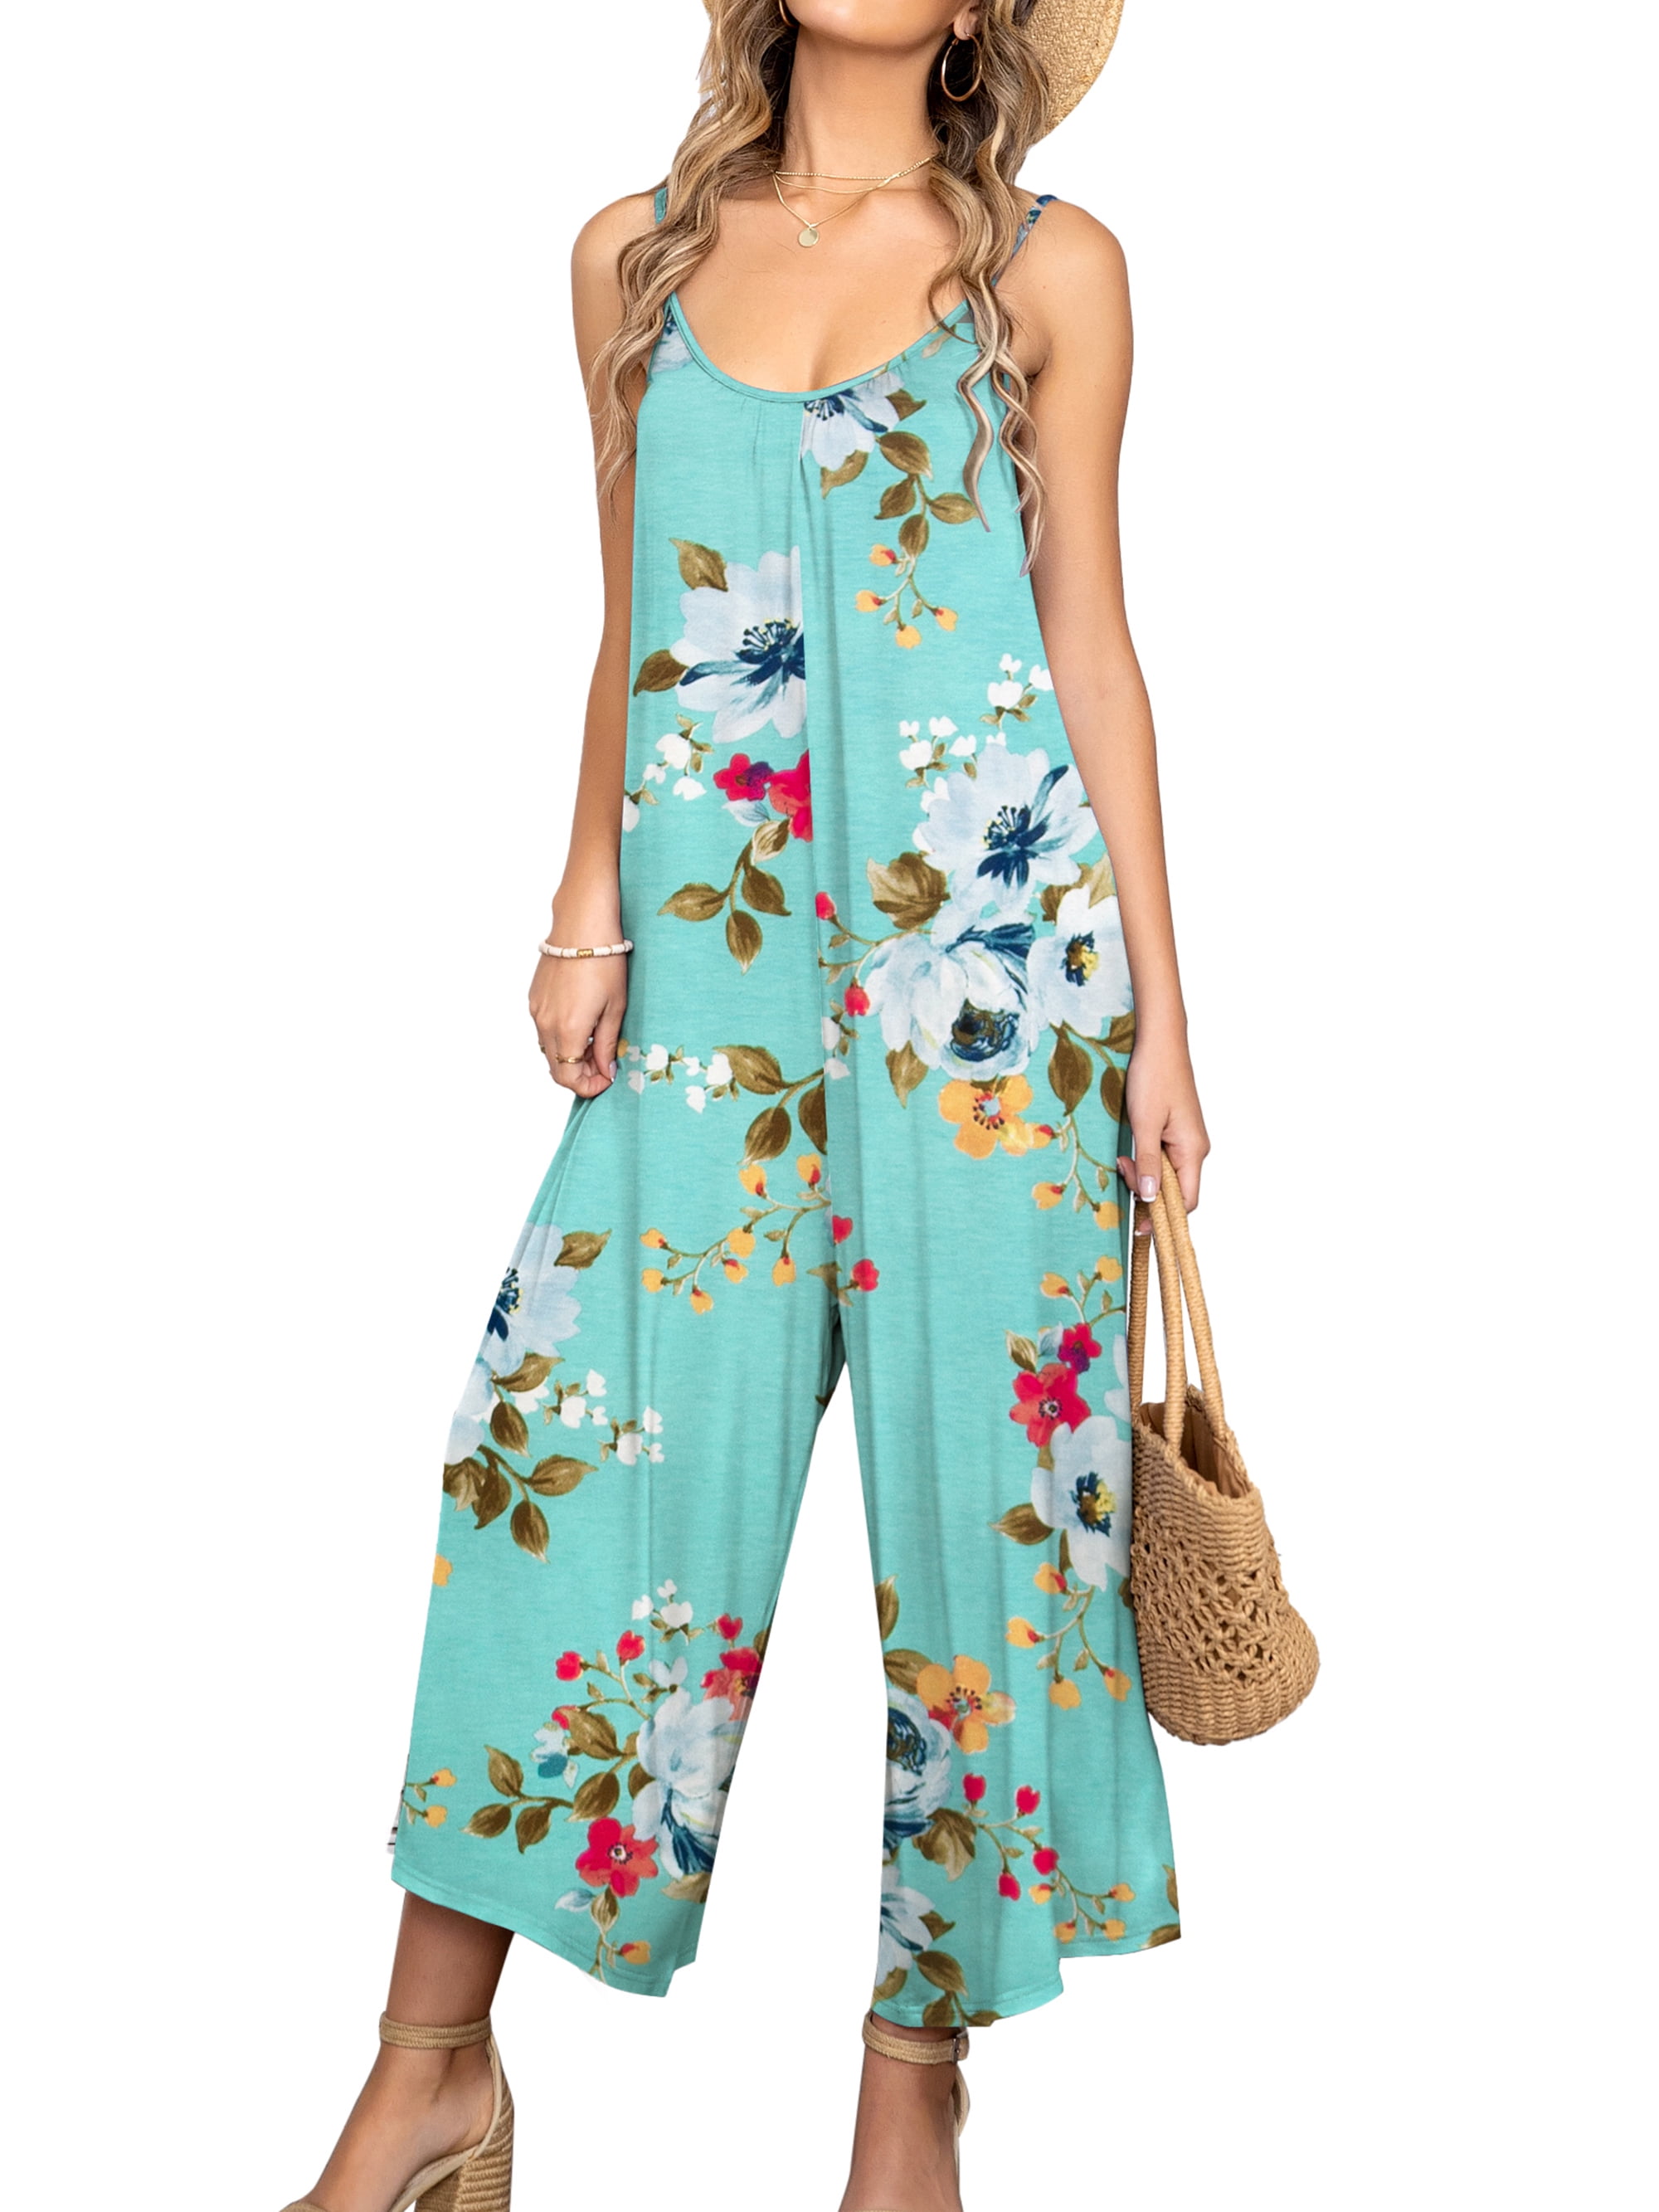 Rompers and Jumpsuits for Women  Floral  Printed  Ethnic  Jeans  Warehouse